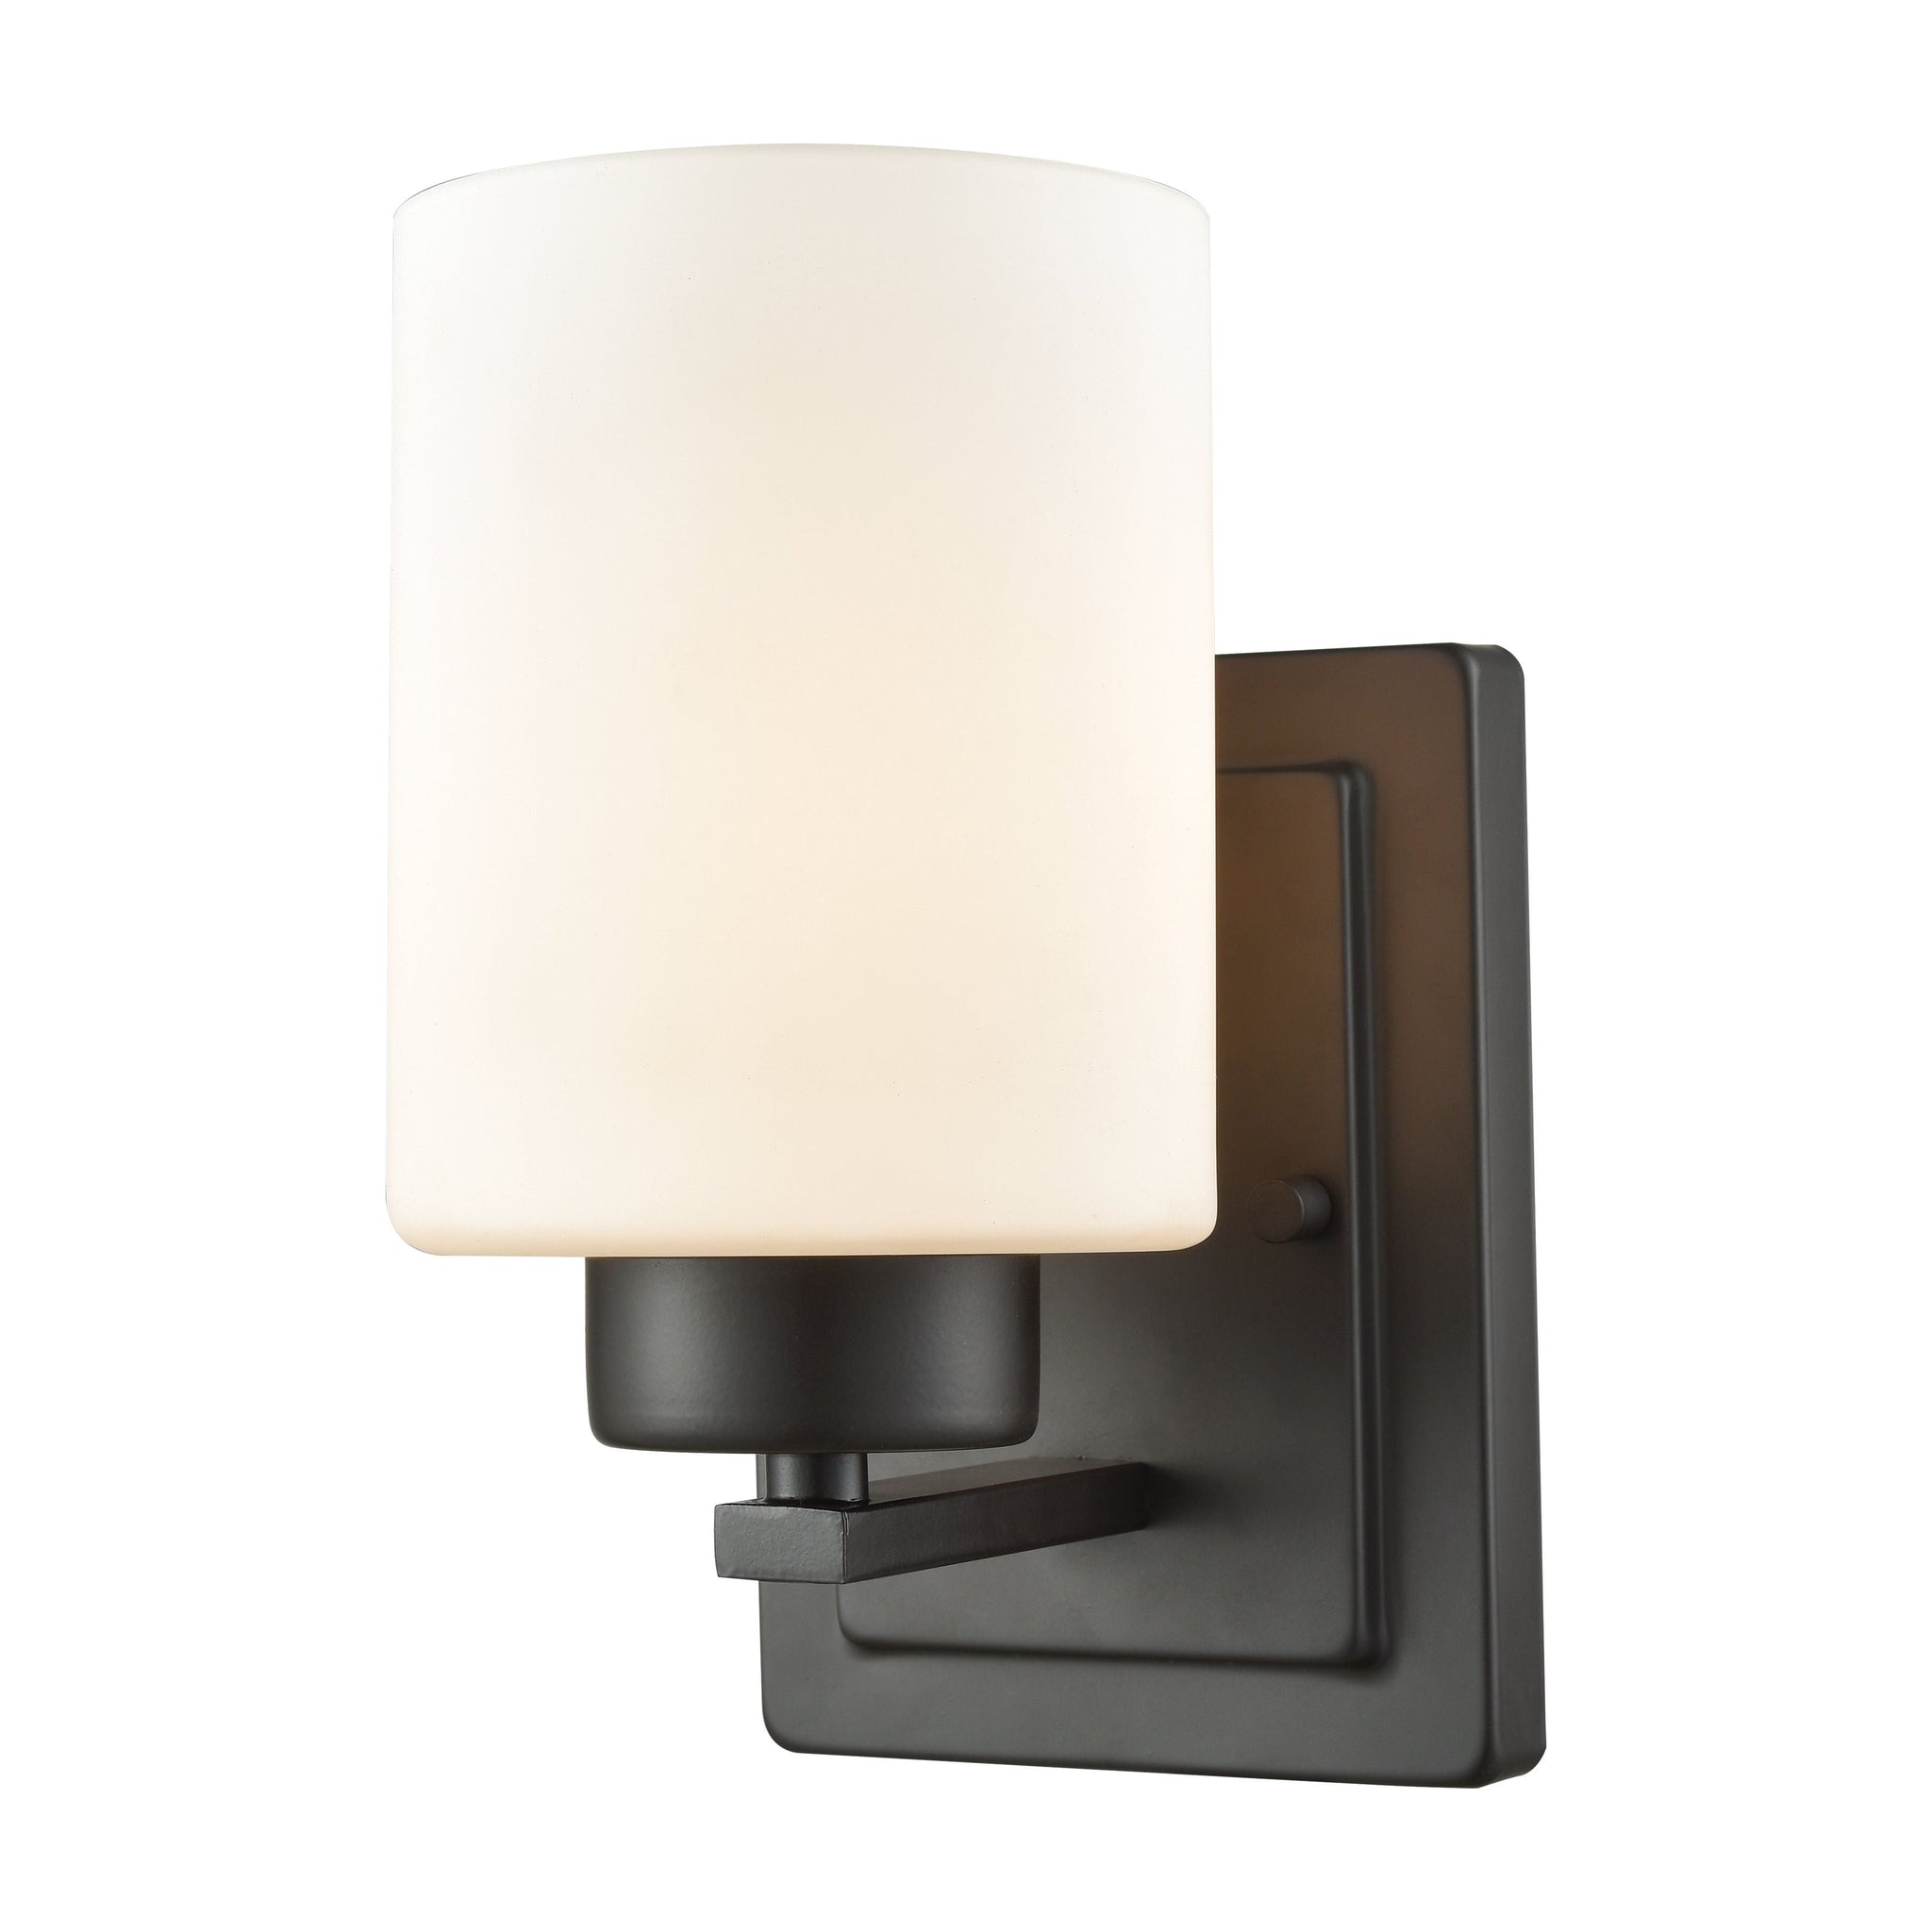 Summit Place 9" High 1-Light Sconce